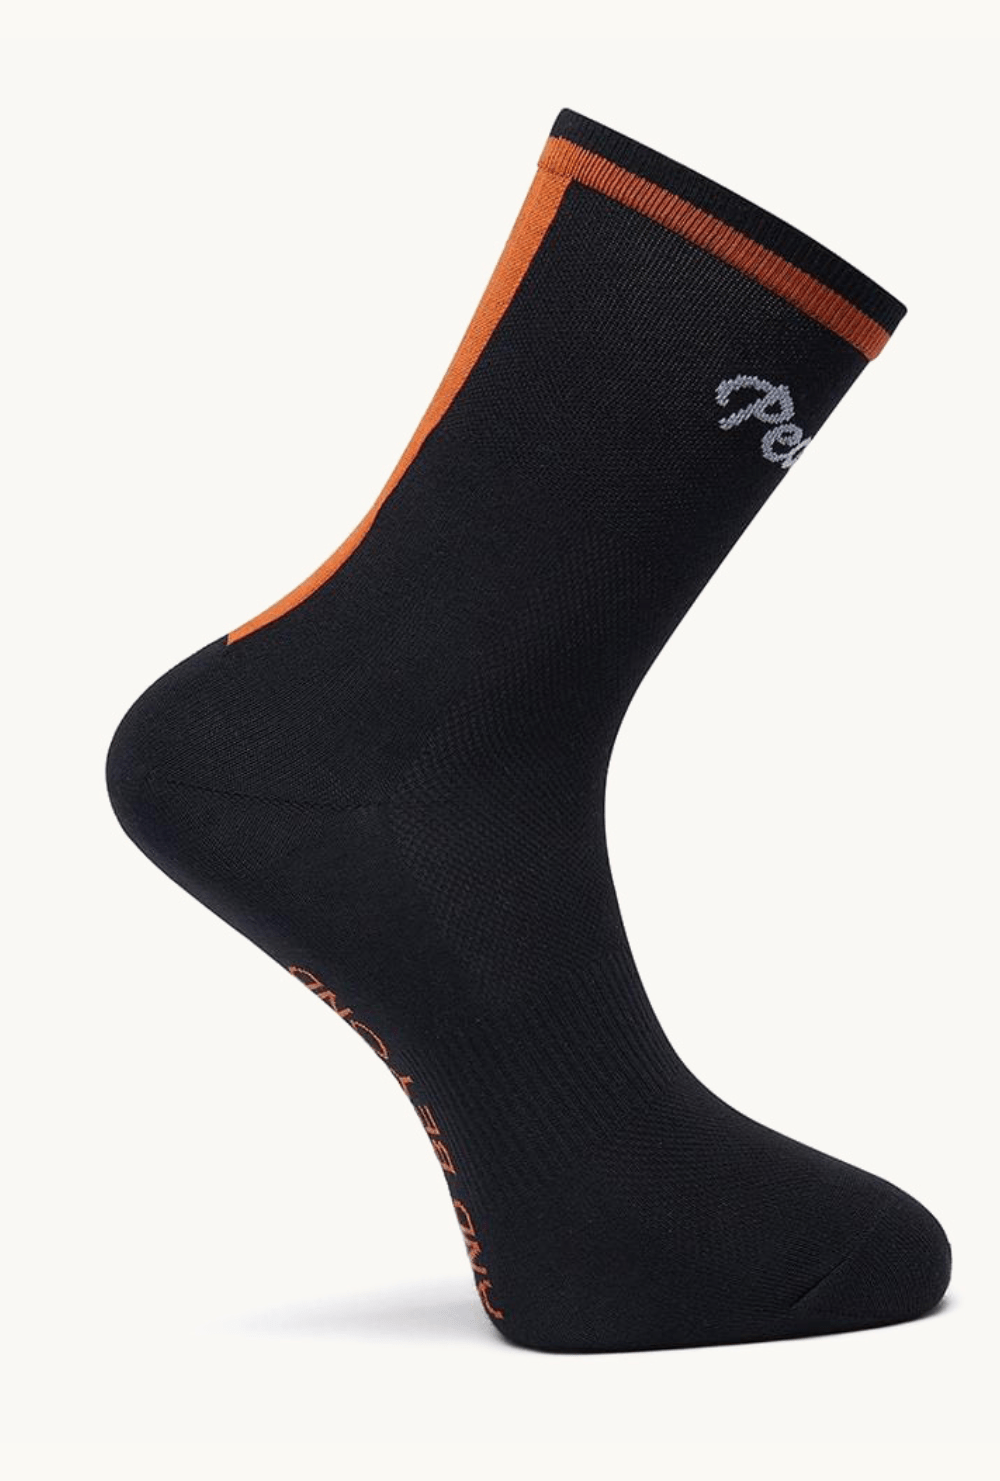 Pearson 1860  To Infinity And Beyond - Socks  L/xl